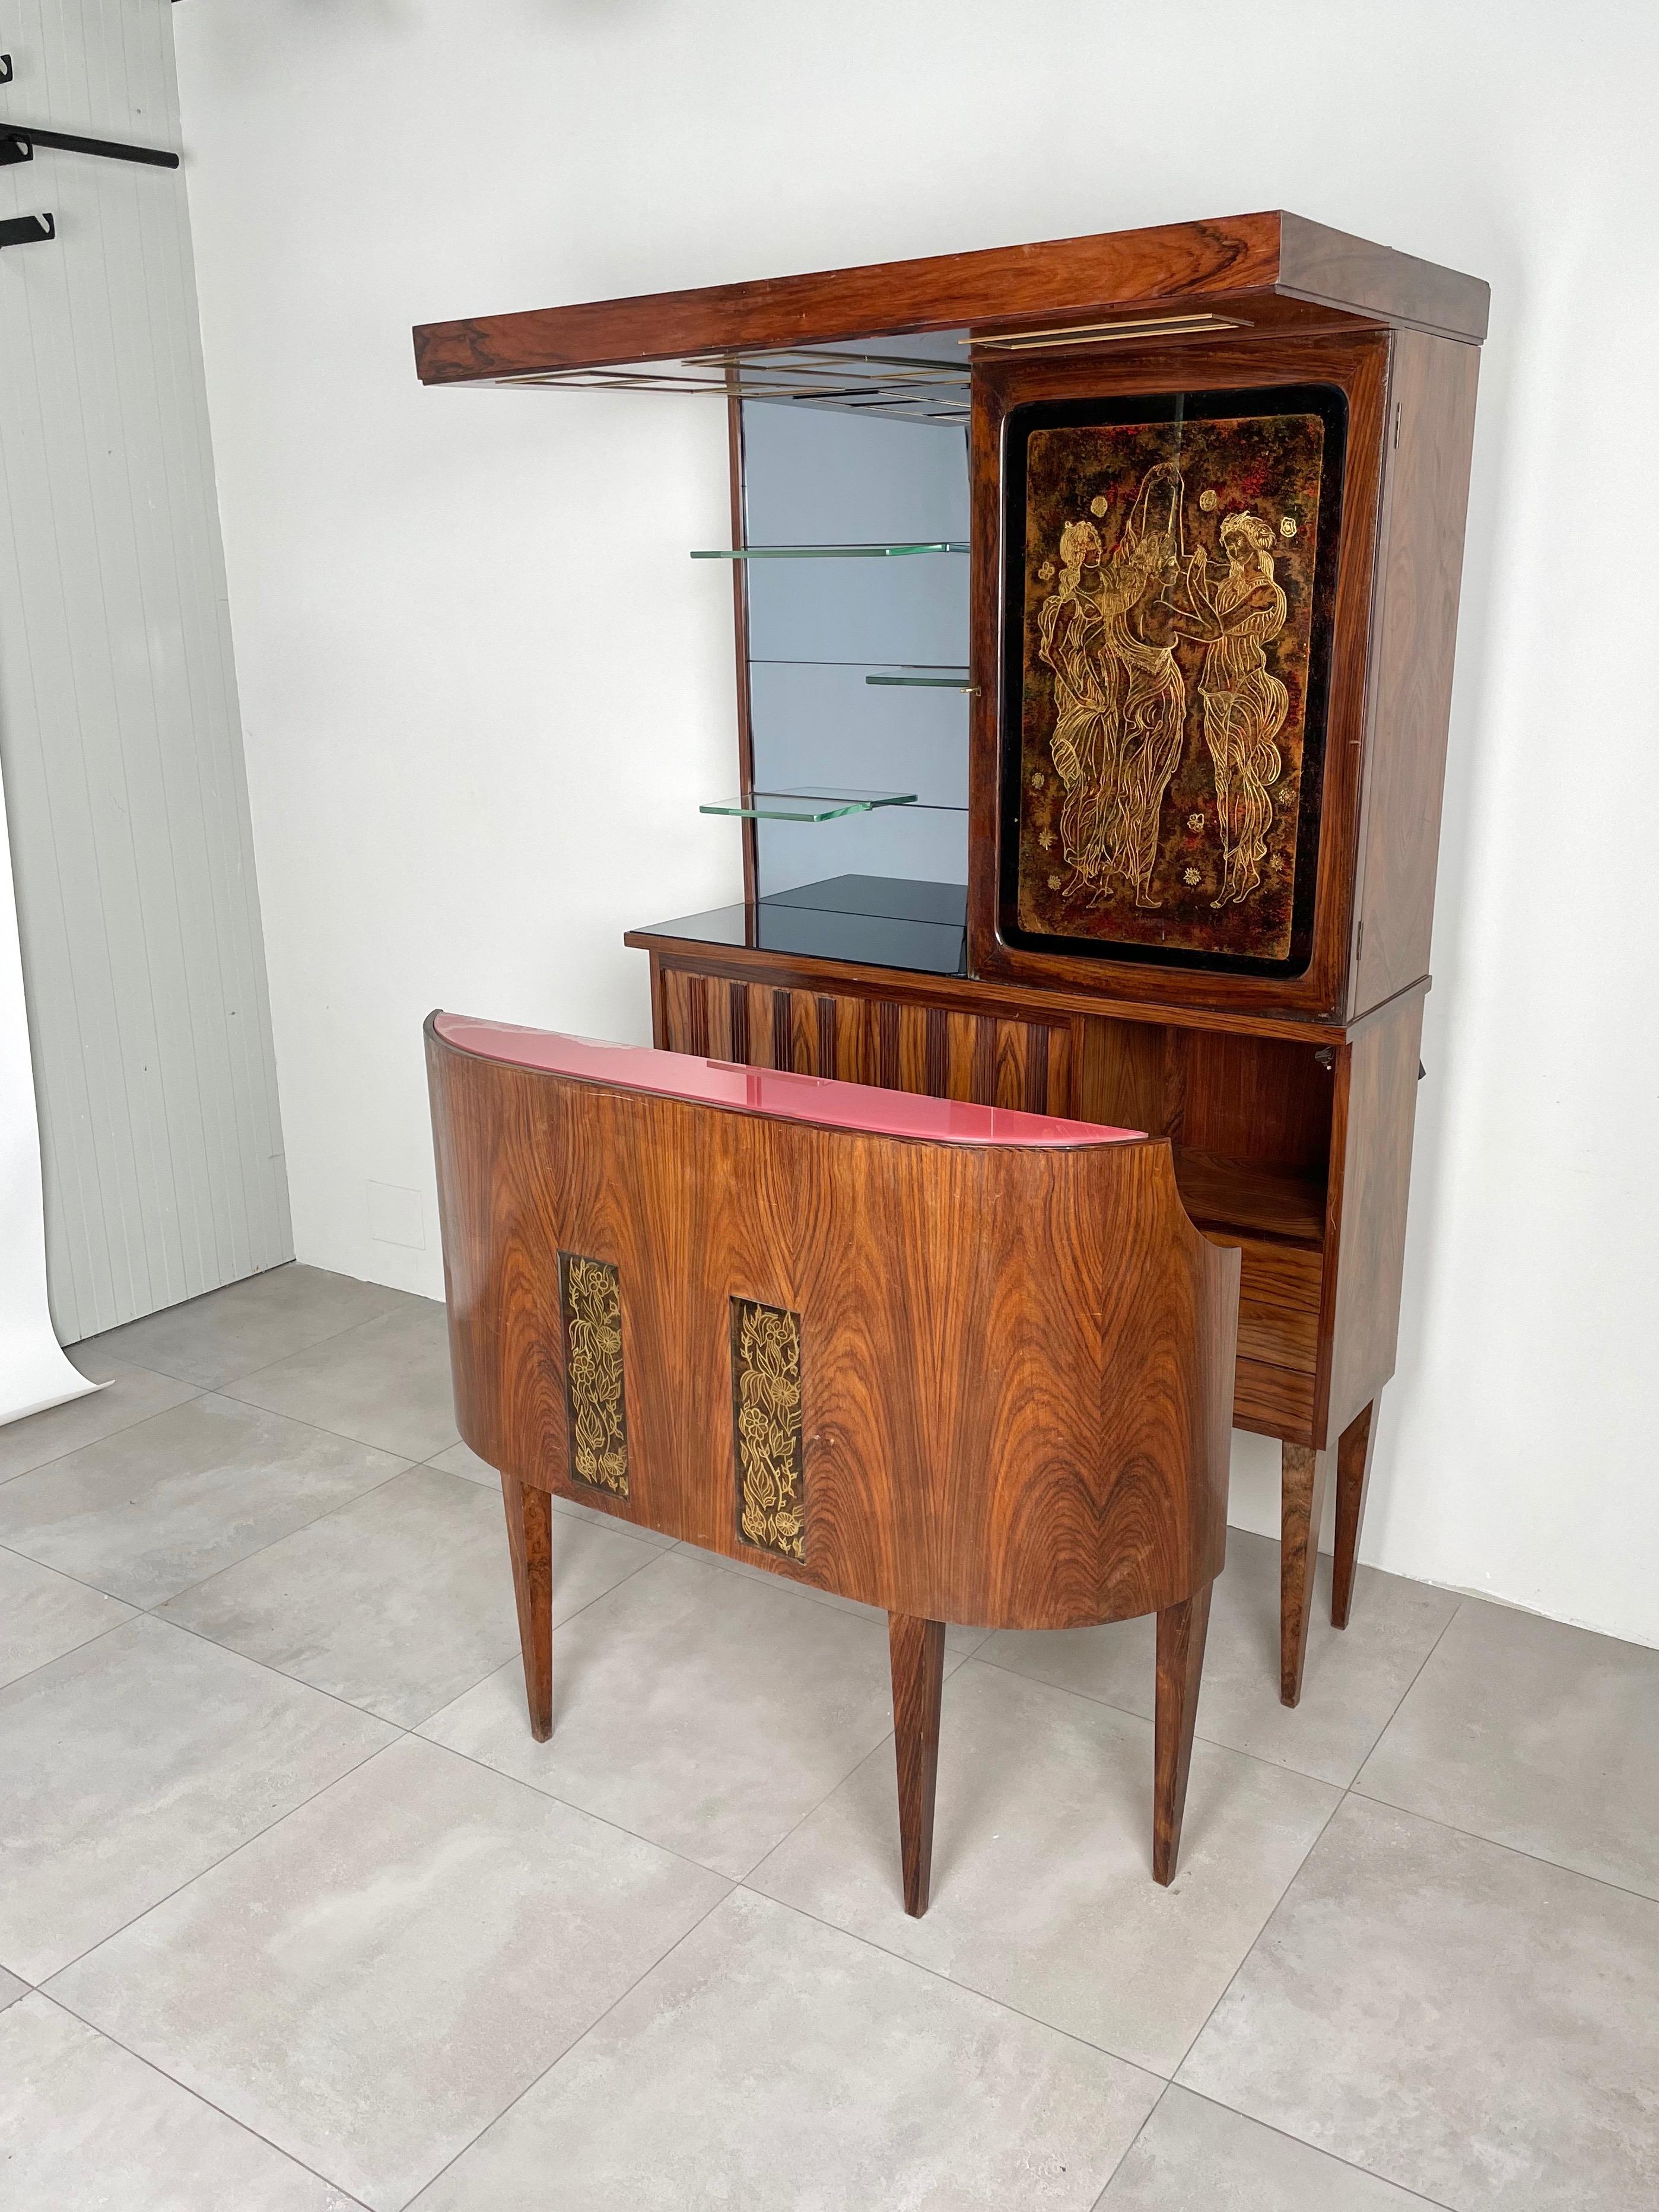 Mid-Century Modern Bar Cabinet in Wood, Mirror and Glass, Italy, 1960s For Sale 1